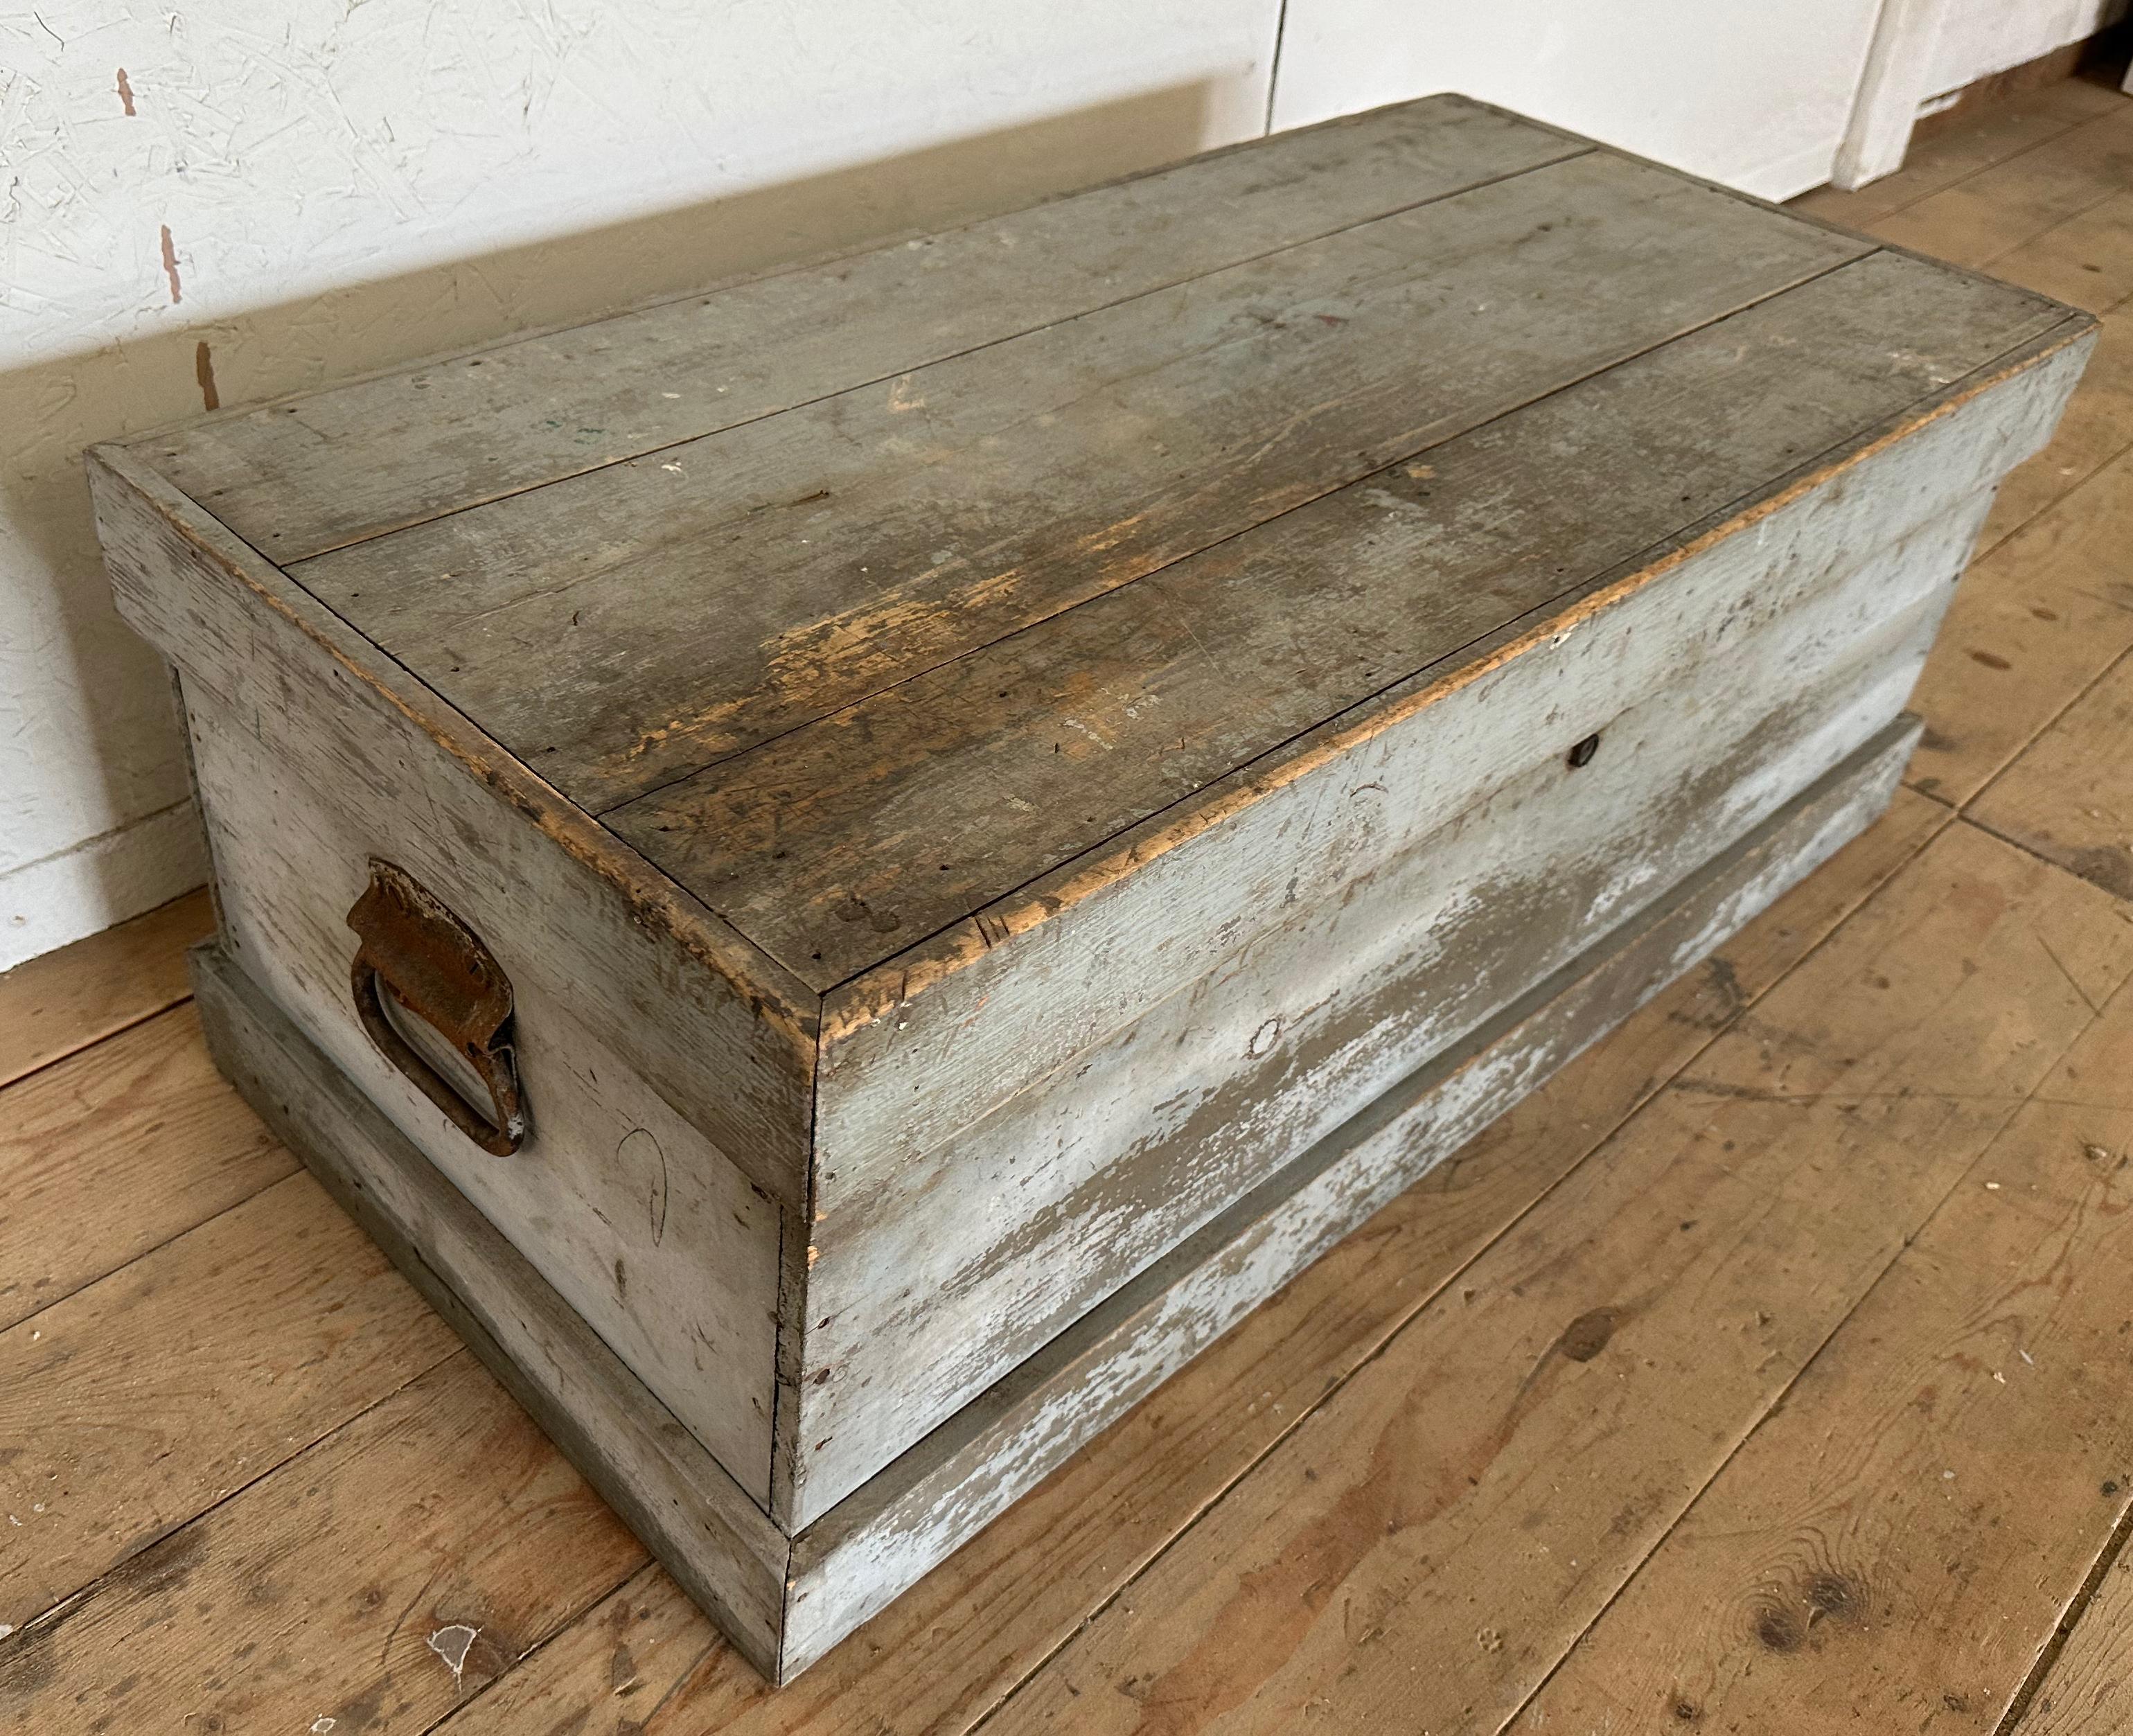 Antique American country blanket chest in beautiful original aged distressed blue painted surface. Iron handles at sides. Key for lock is no longer available. The open interior compartment is fully functional for storage.
The chest will make a